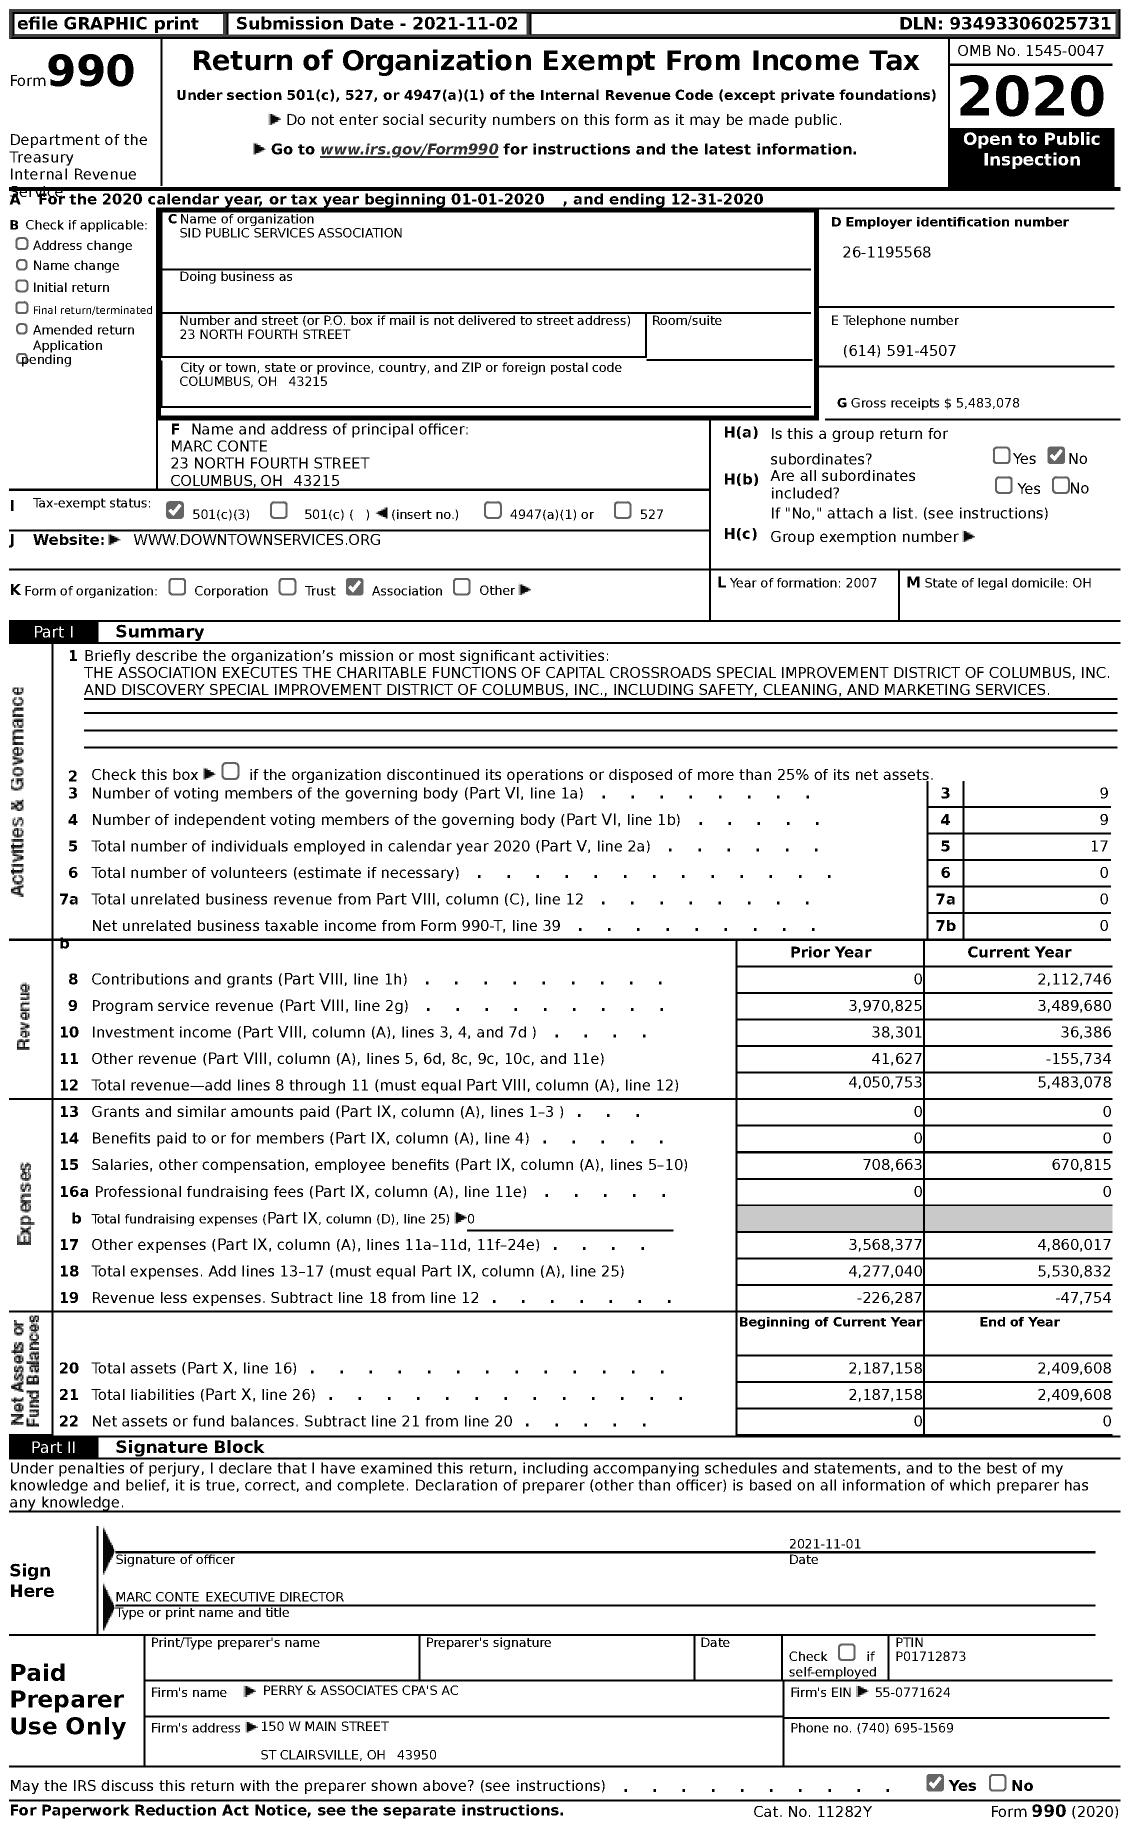 Image of first page of 2020 Form 990 for Sid Public Services Association